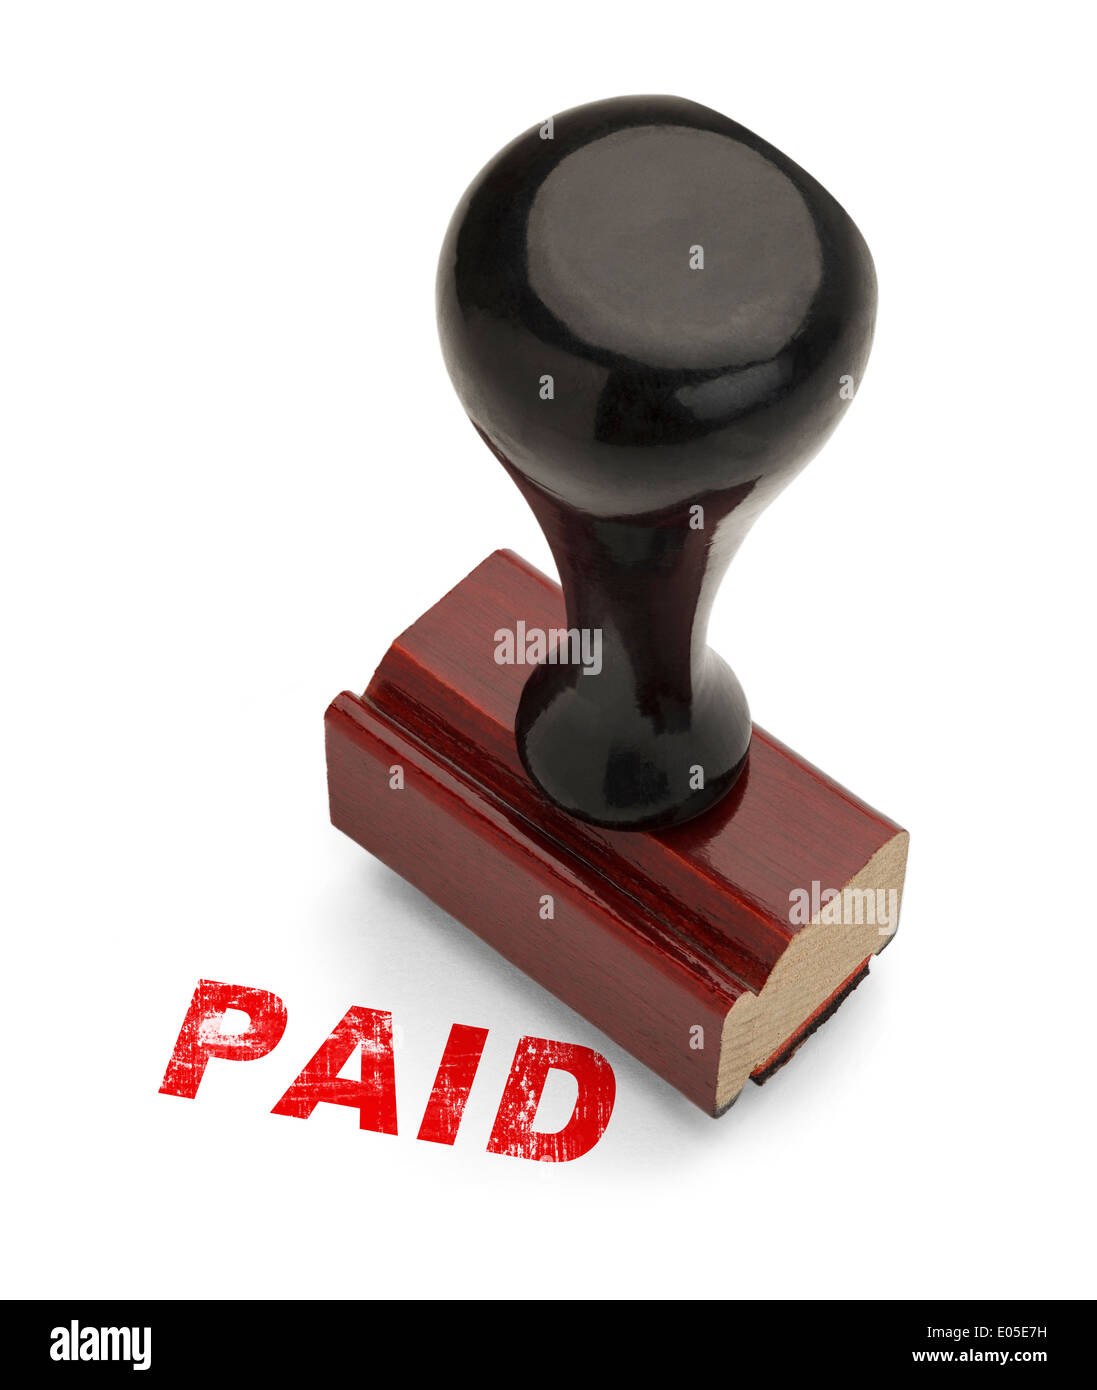 Red Paid Stamp with Wood Handle Stamper Isolated on White Background. Stock Photo